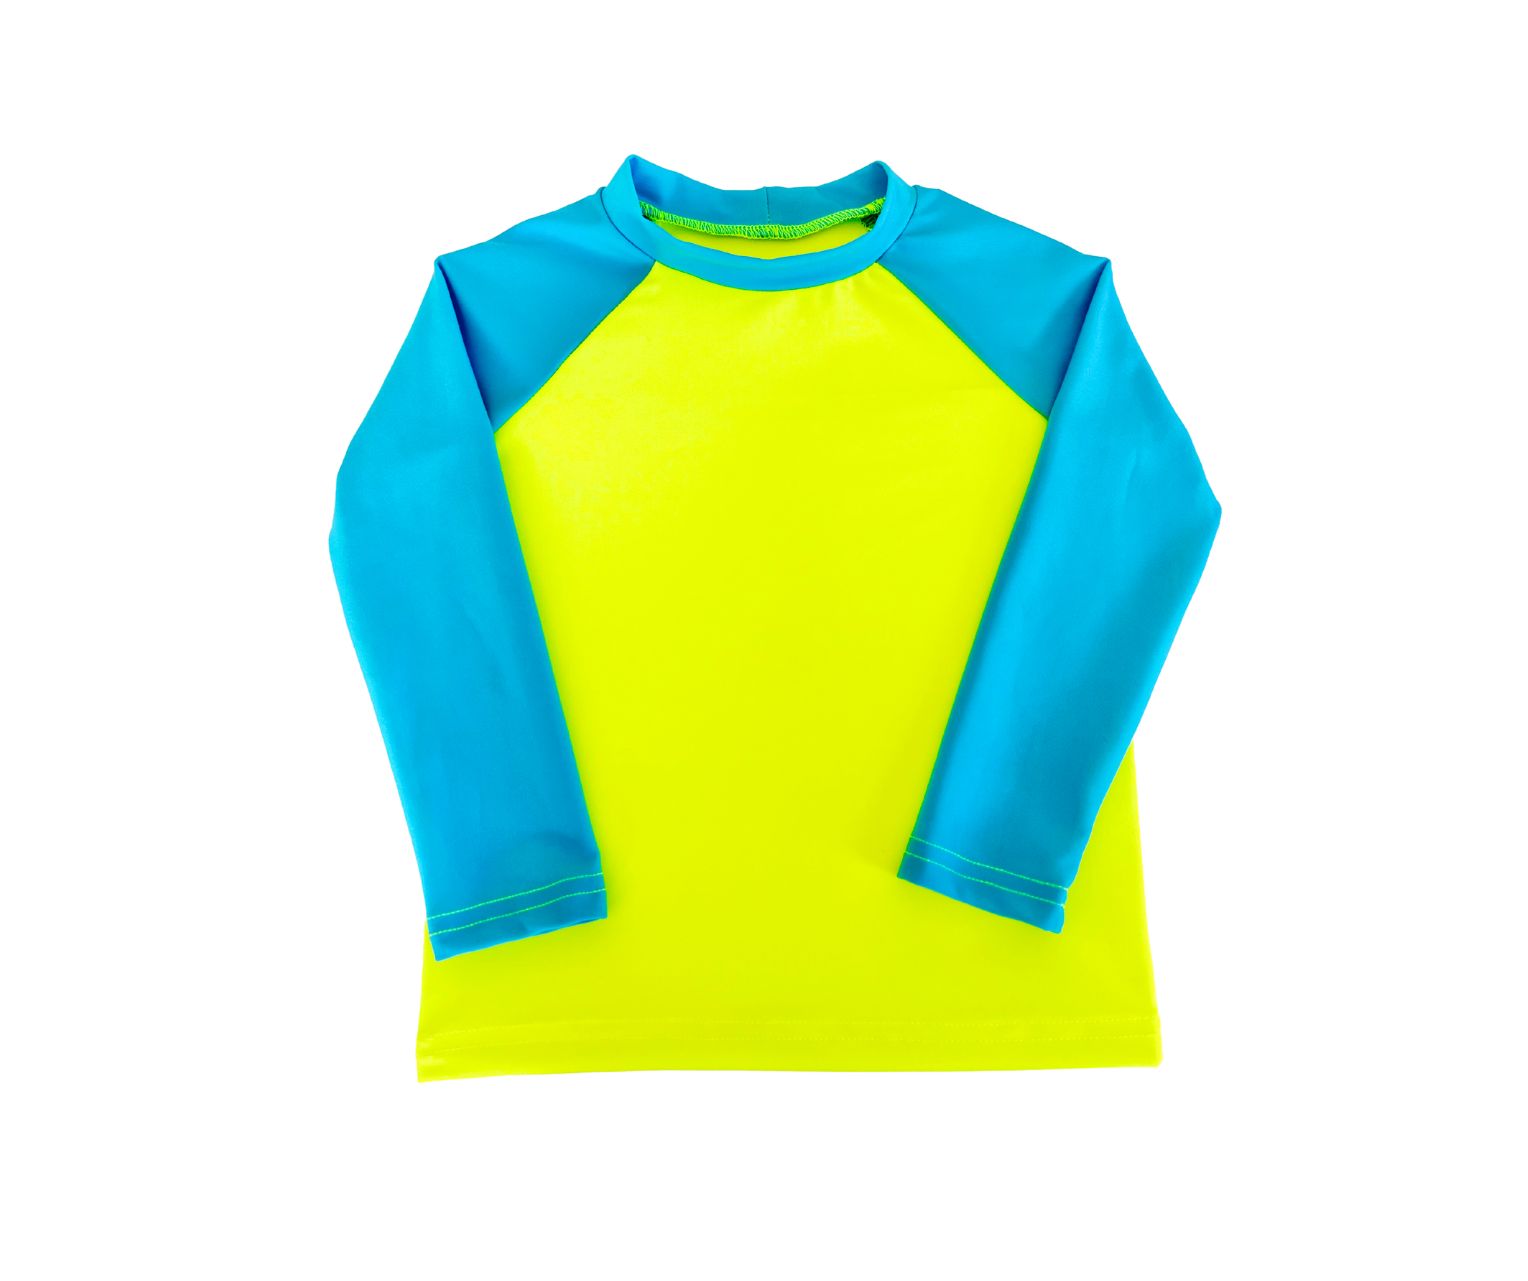 A single product image of a neon yellow rash guard with blue long sleeves.